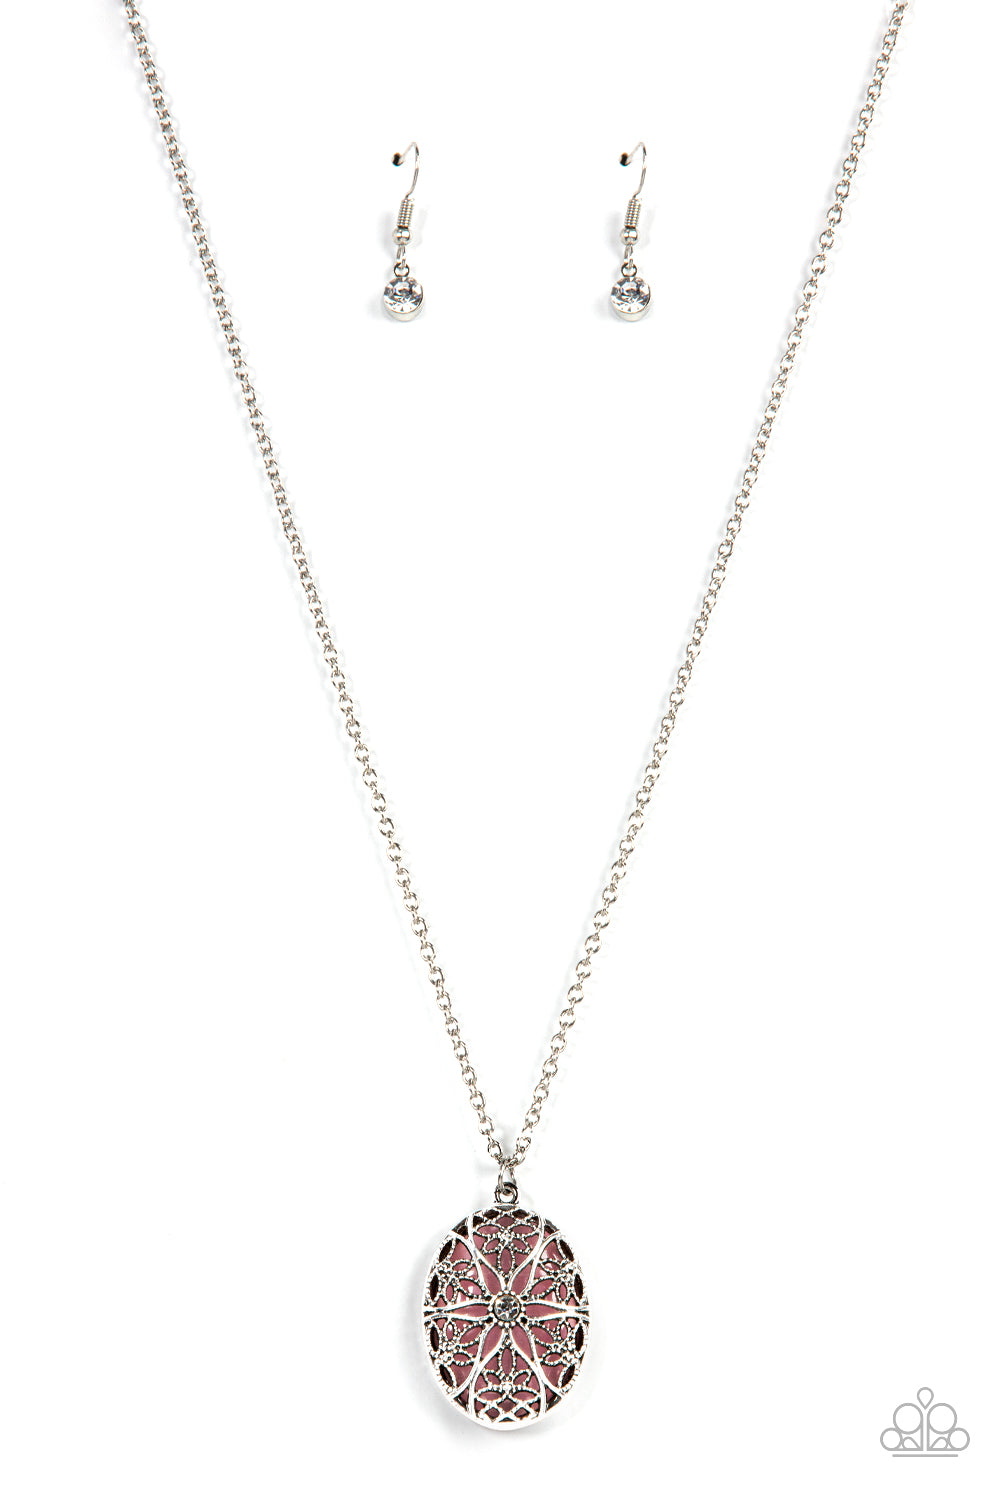 Venice Vacation Paparazzi Accessories Necklace with Earrings - Pink